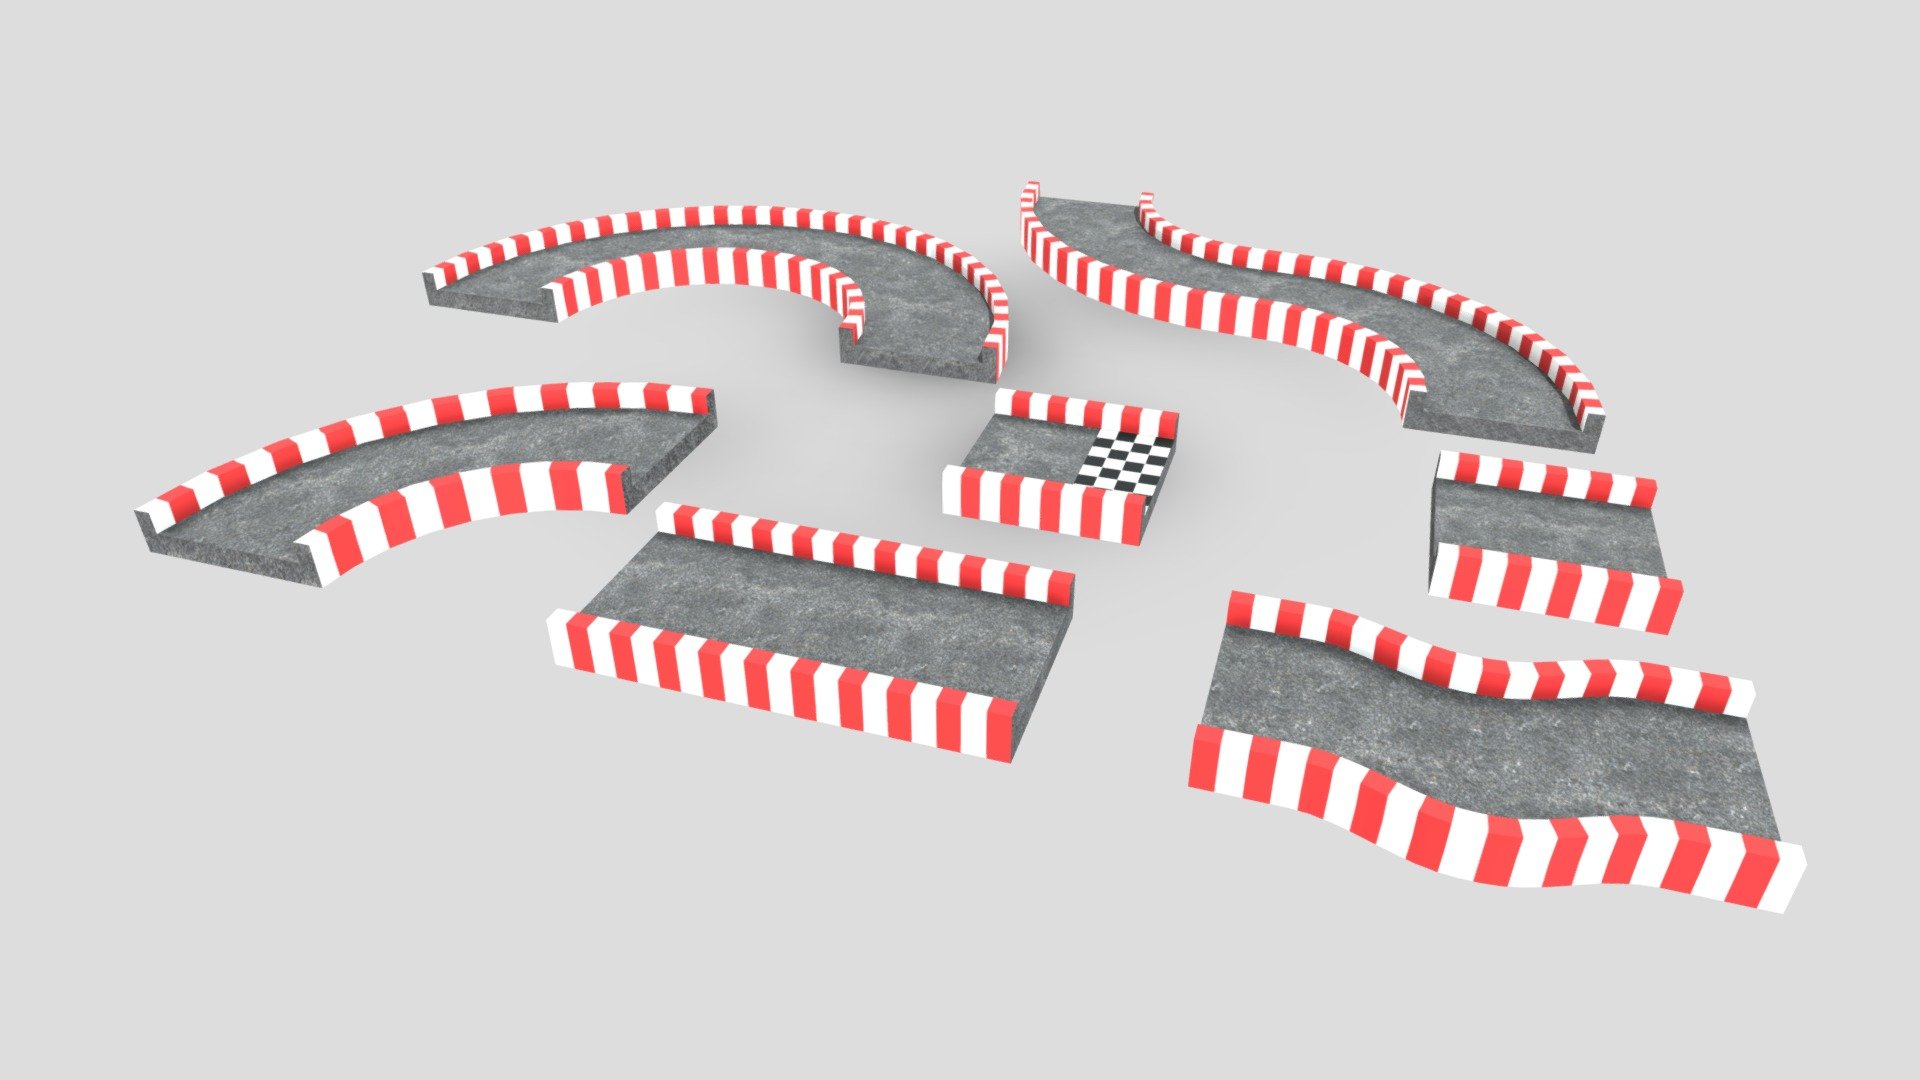 Racetrack Segments Collection that I made using Blender. This collection includes 7 different racetrack segments.

Features:




Includes GLTF file type instructions

Models are low poly

Includes 3 premade tracks

Models are modular and can be rotated, flipped, duplicated, and snapped together

Models were made using the metalness workflow and use 4K PBR textures in PNG format

Models have been manually UV unwrapped

Models use normal maps to add extra detail

Blend files include pre-applied textures as well as camera and lighting setups

Extra lighting has been provided by included HDR maps downloaded from HDRi Haven

Includes native blend files for each model

Models have been exported in 4 file formats (FBX, OBJ, GLTF/GLB, DAE/Collada)

Included Textures:




AO, Diffuse, Roughness, Gloss, Normal

UVLayout

 - Racetrack Segments Collection - Buy Royalty Free 3D model by Pickle55100 3d model